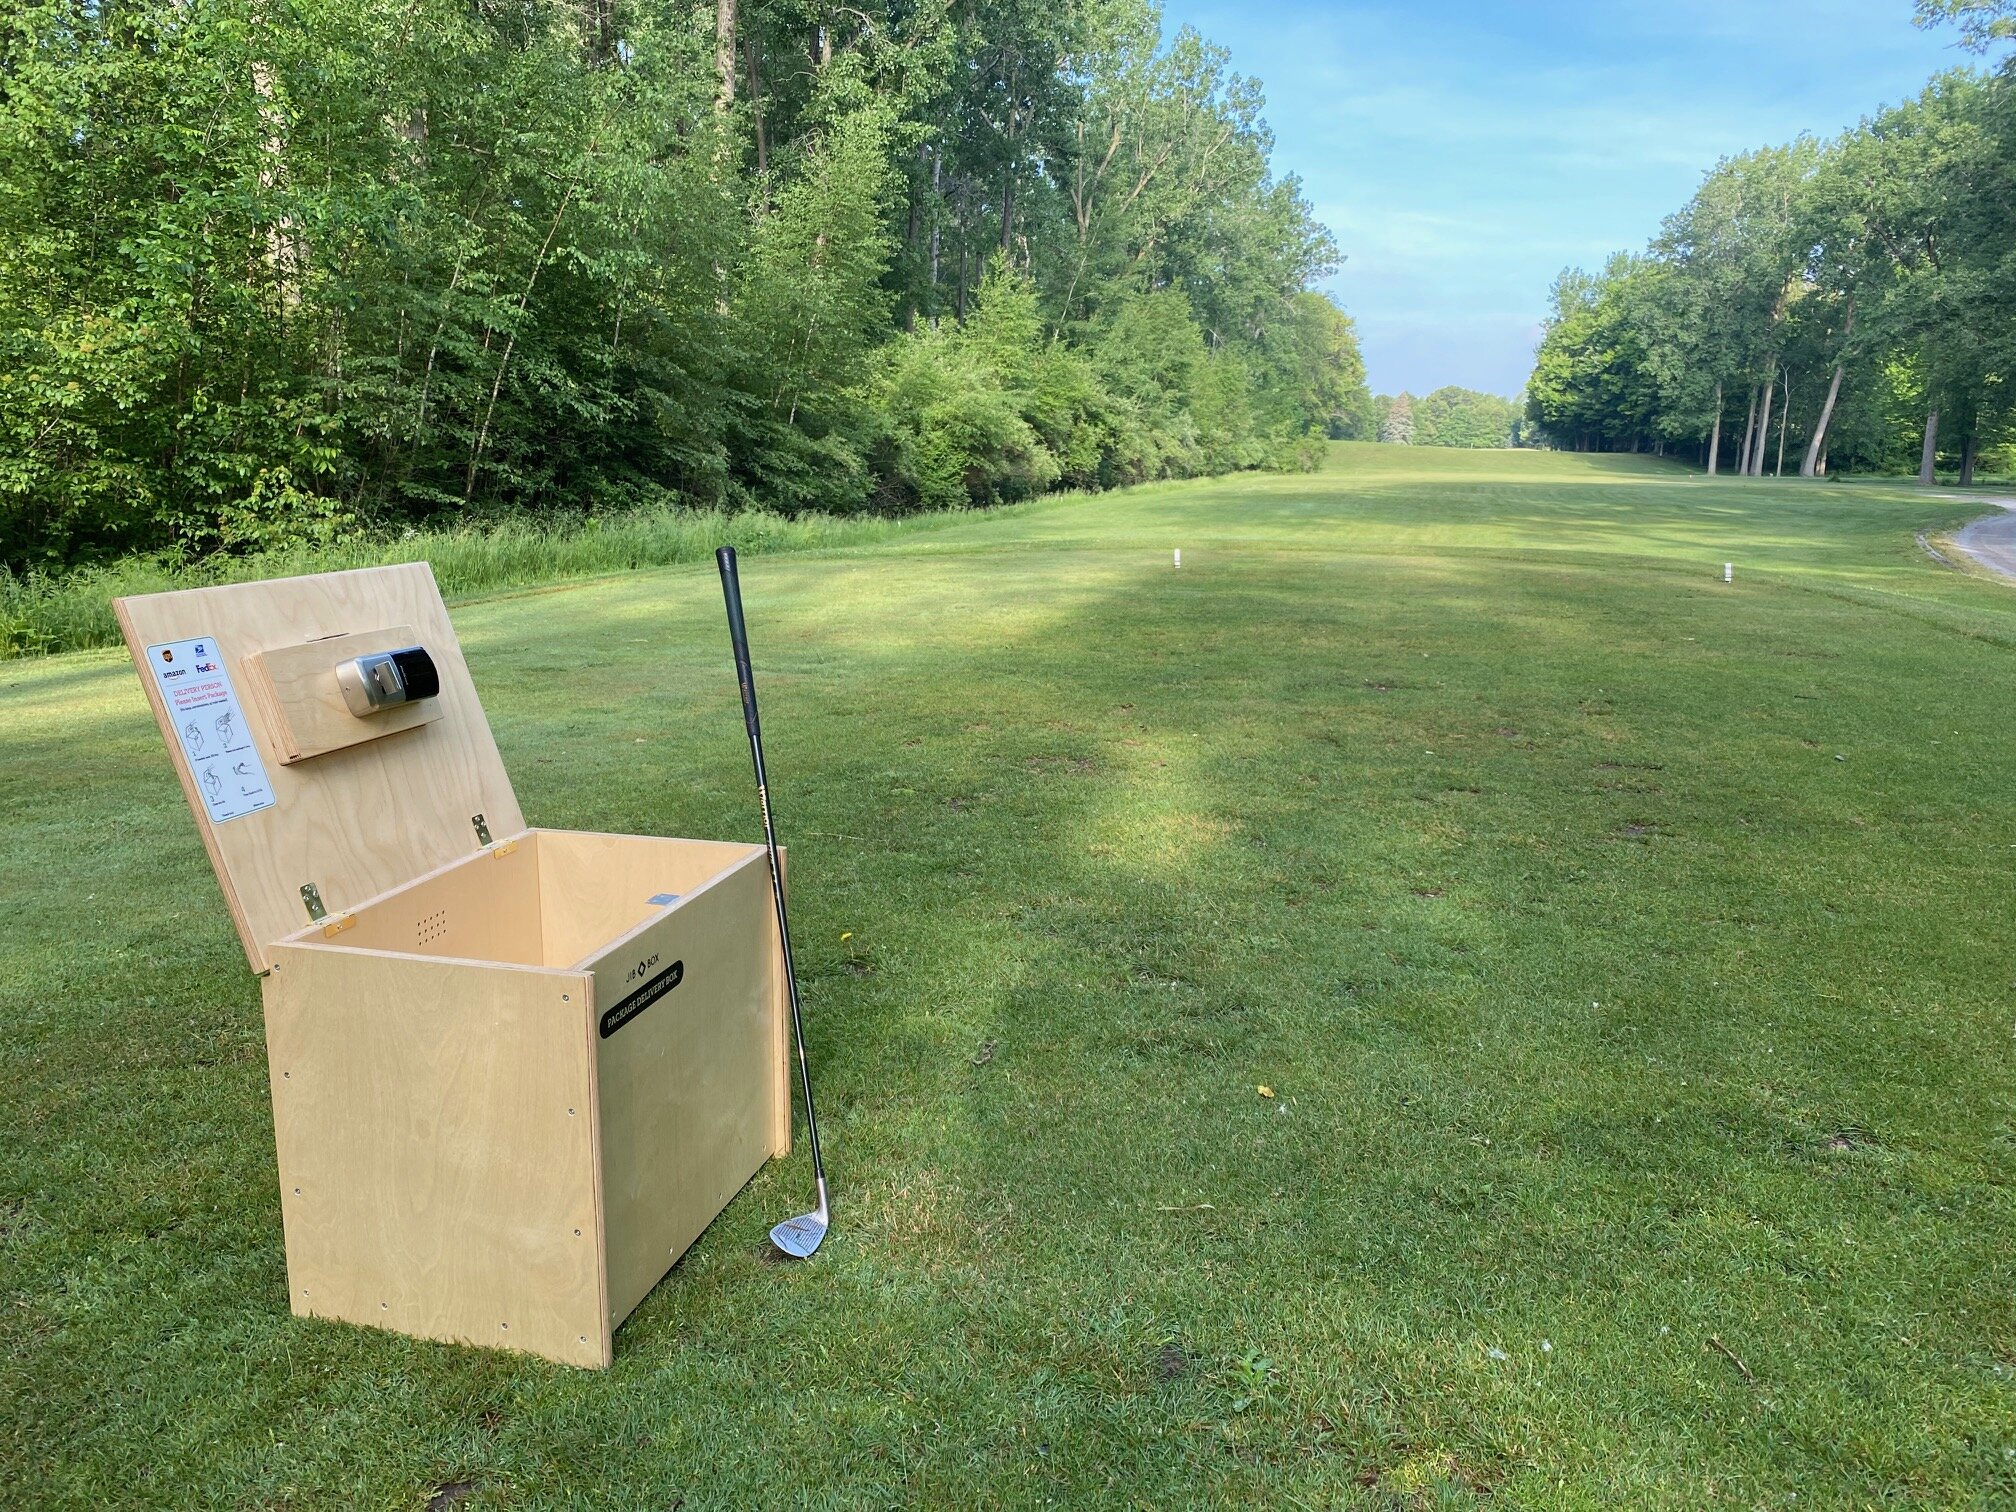 GLBMA Golf Outing 2021 - JIB Box for Chipping Contest (showing more of golf course)2.jpg